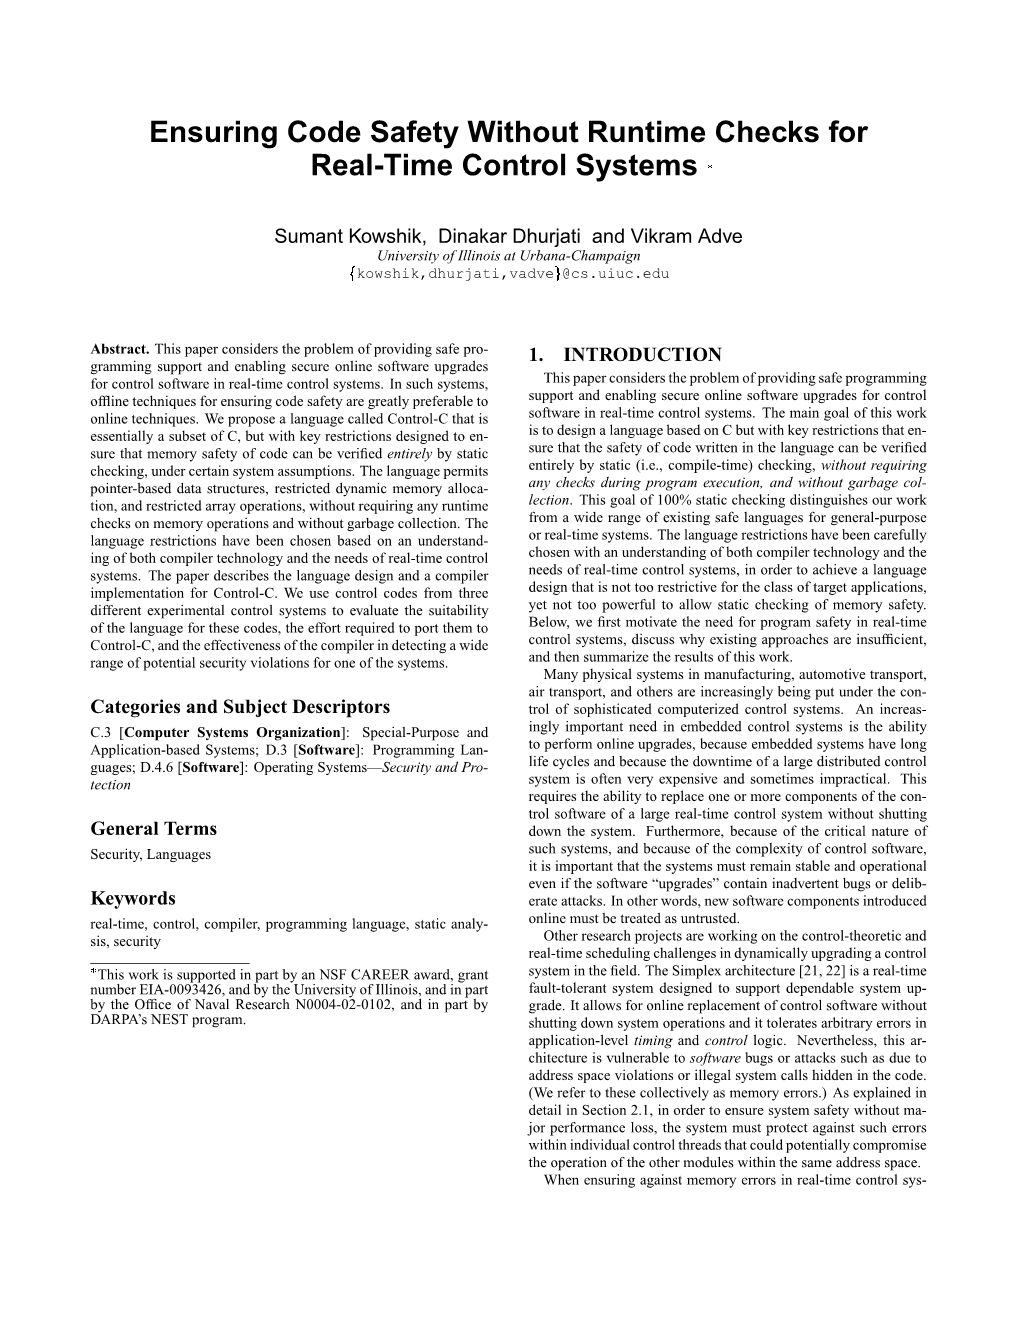 Ensuring Code Safety Without Runtime Checks for Real-Time Control Systems